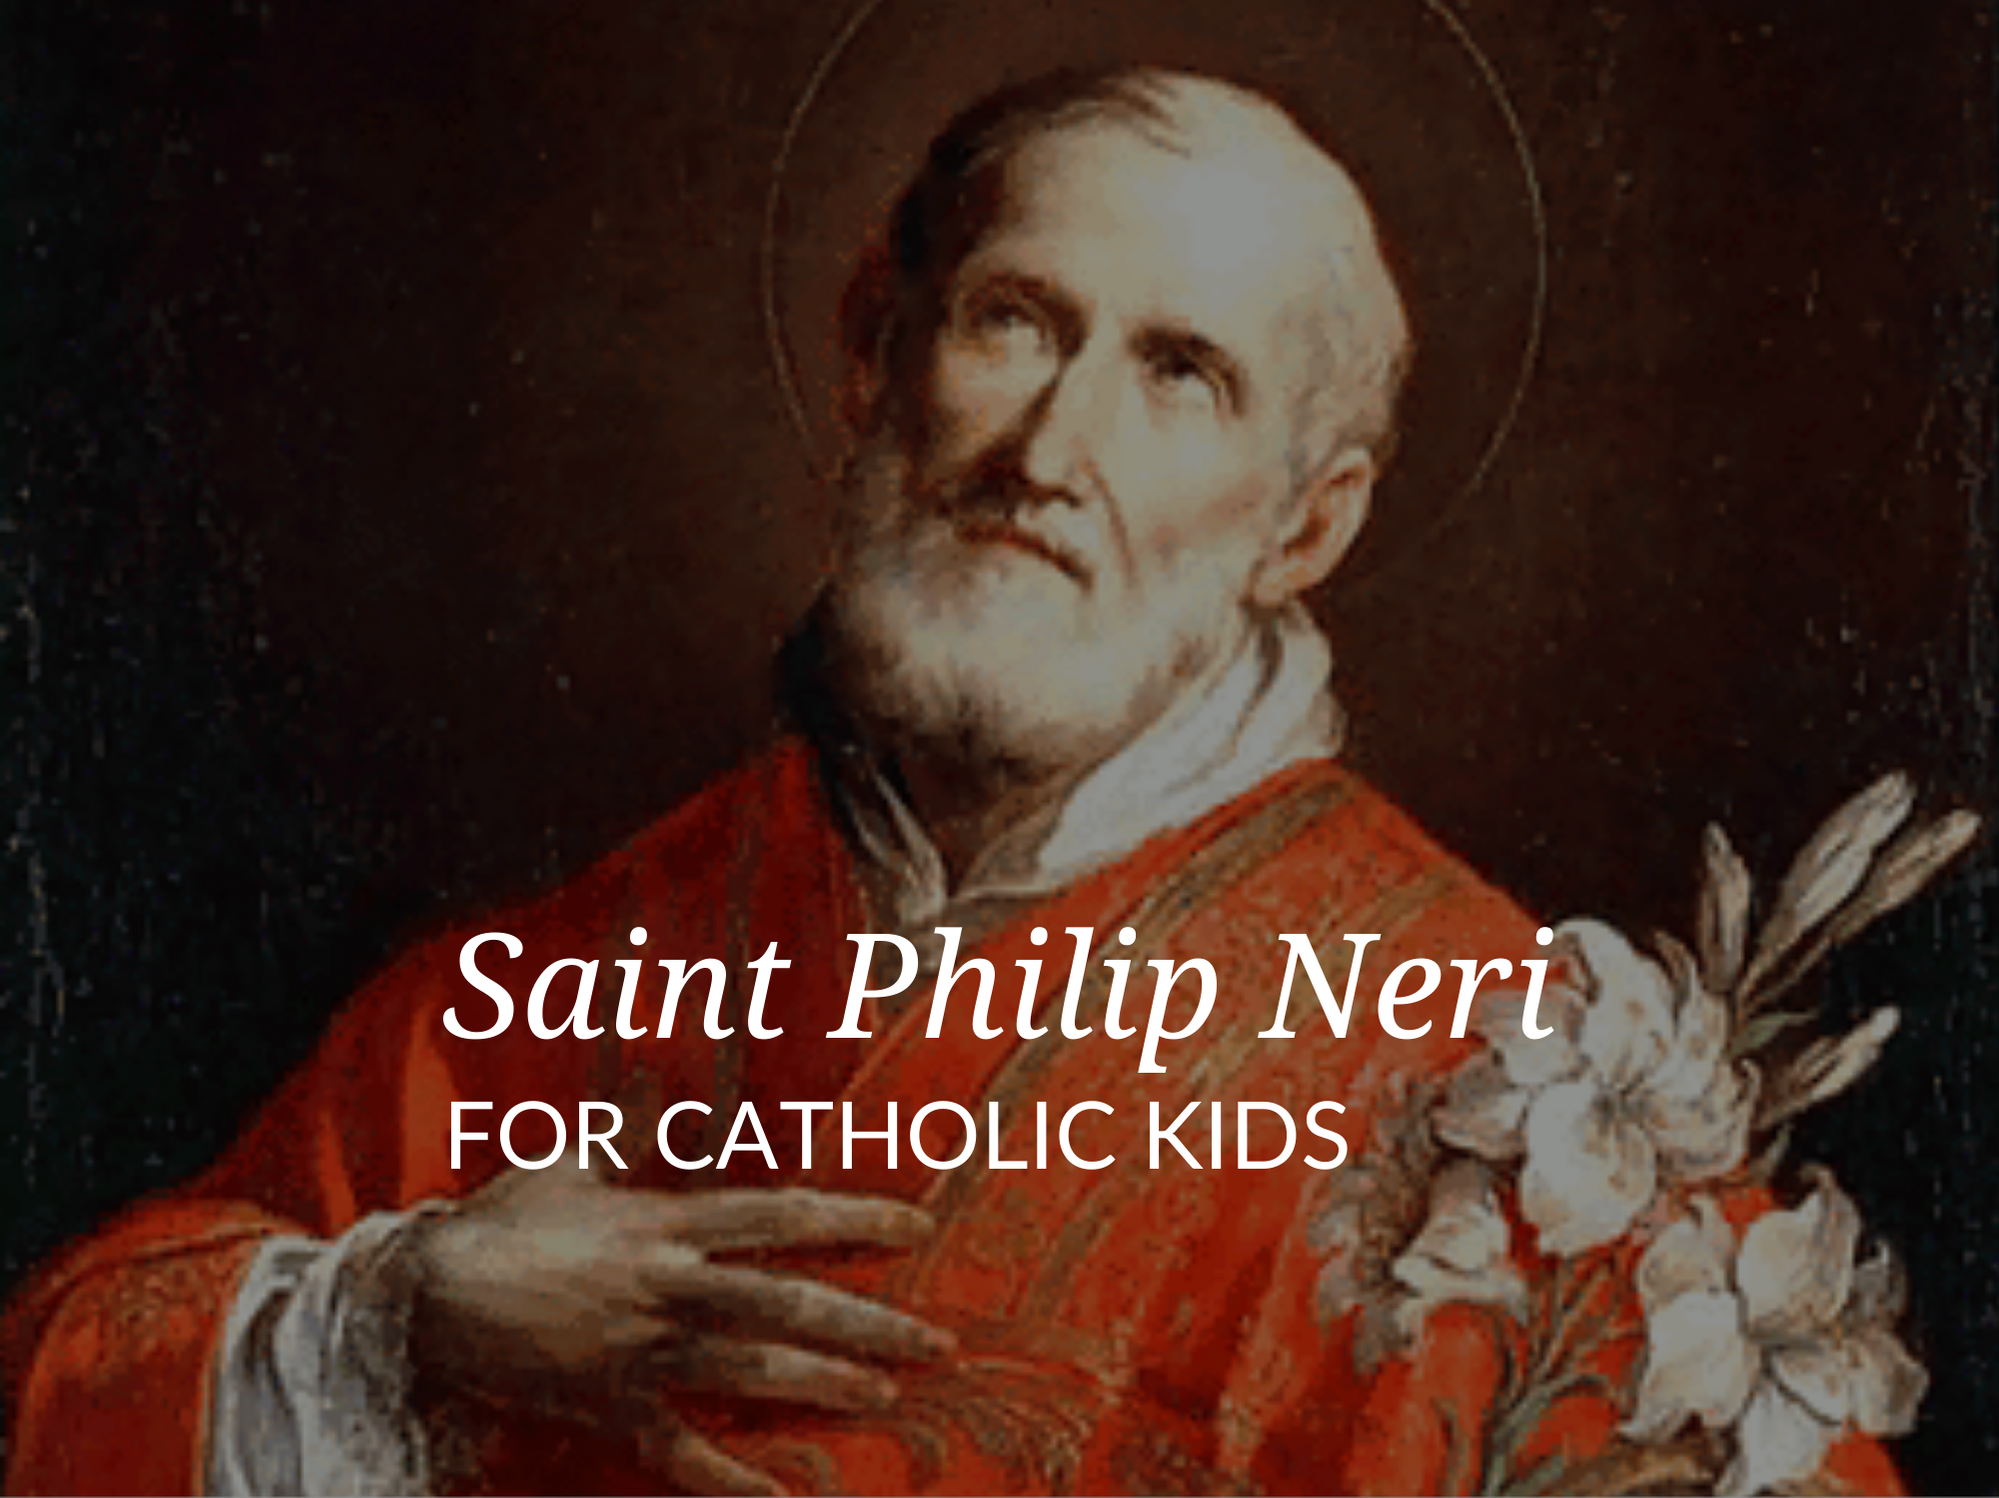 In this article, you’ll discover a short biography and free printable activity that can be used to celebrate the feast day of Saint Philip Neri! Whether at home or in the classroom, theseresources will help children learn more about the life and works of Saint Philip Neri.